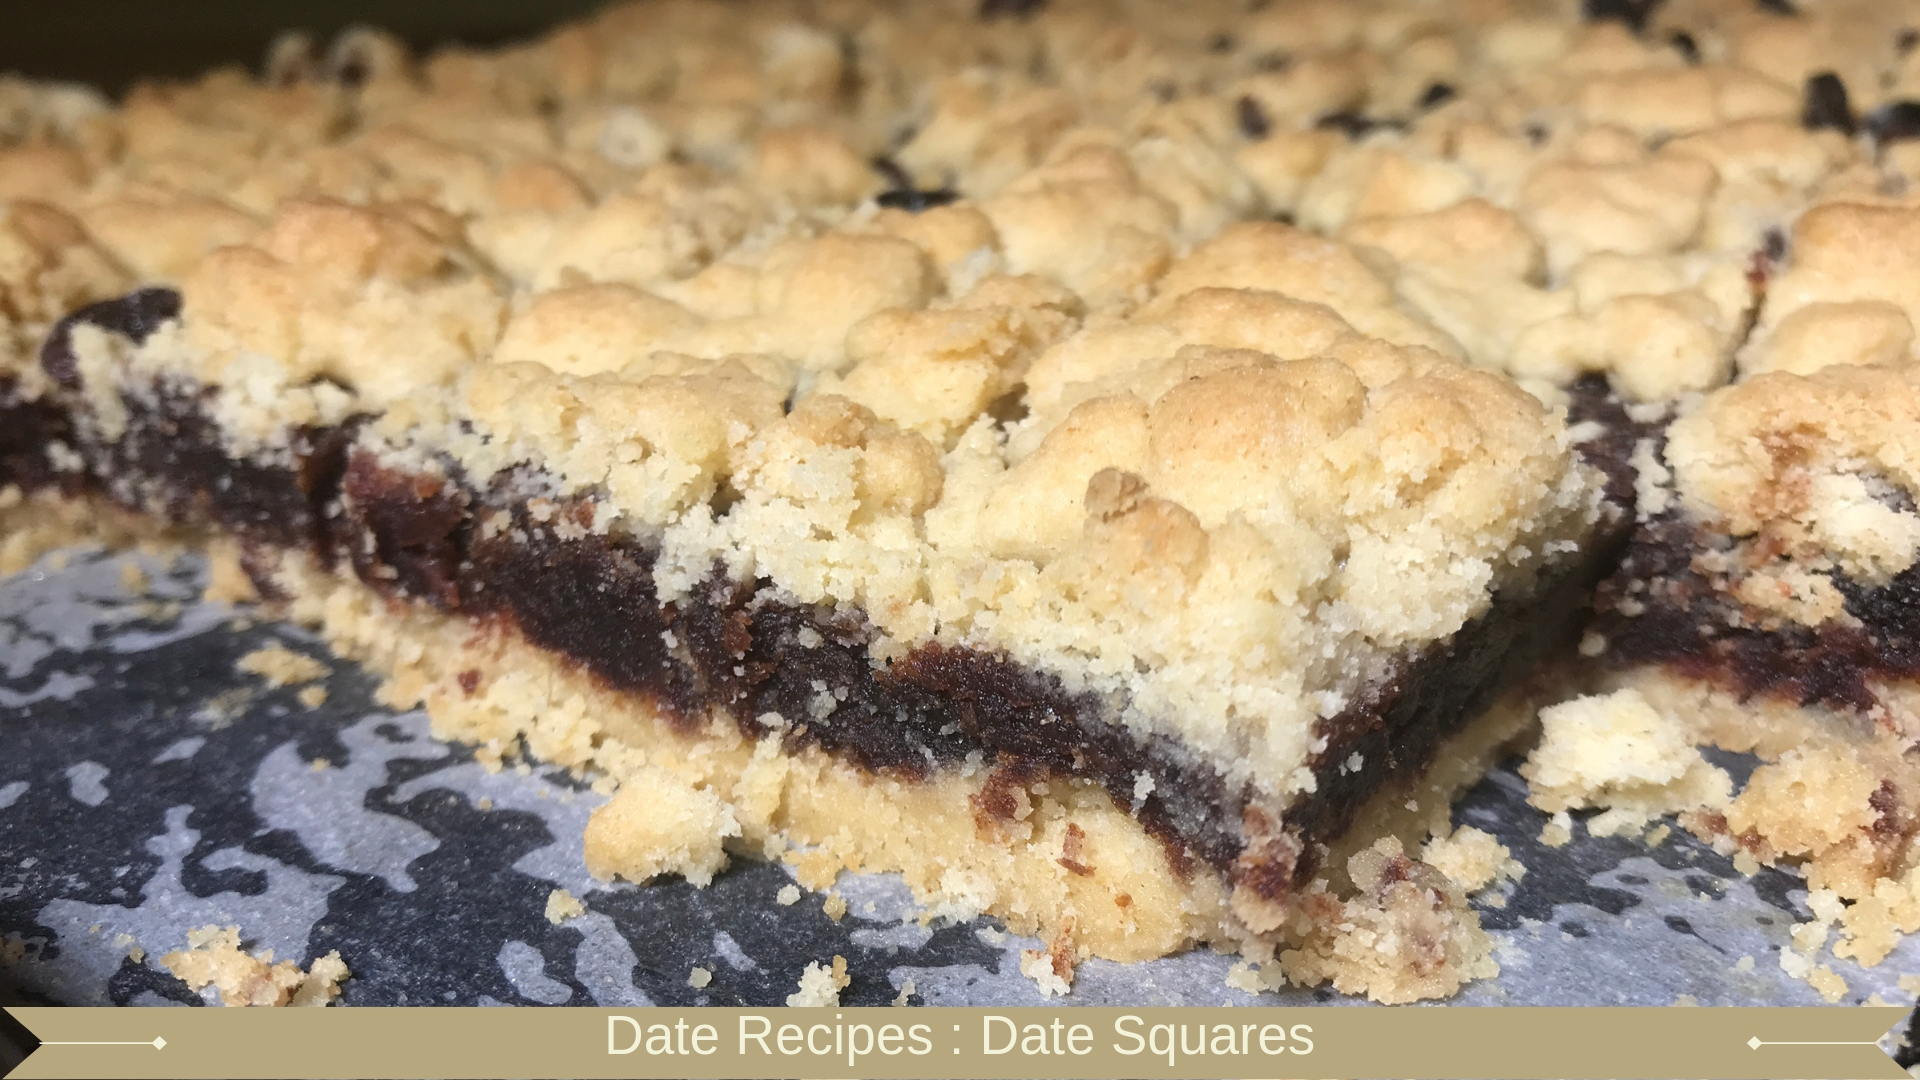 Date Recipes : Shortbread Date Bars Without Oats